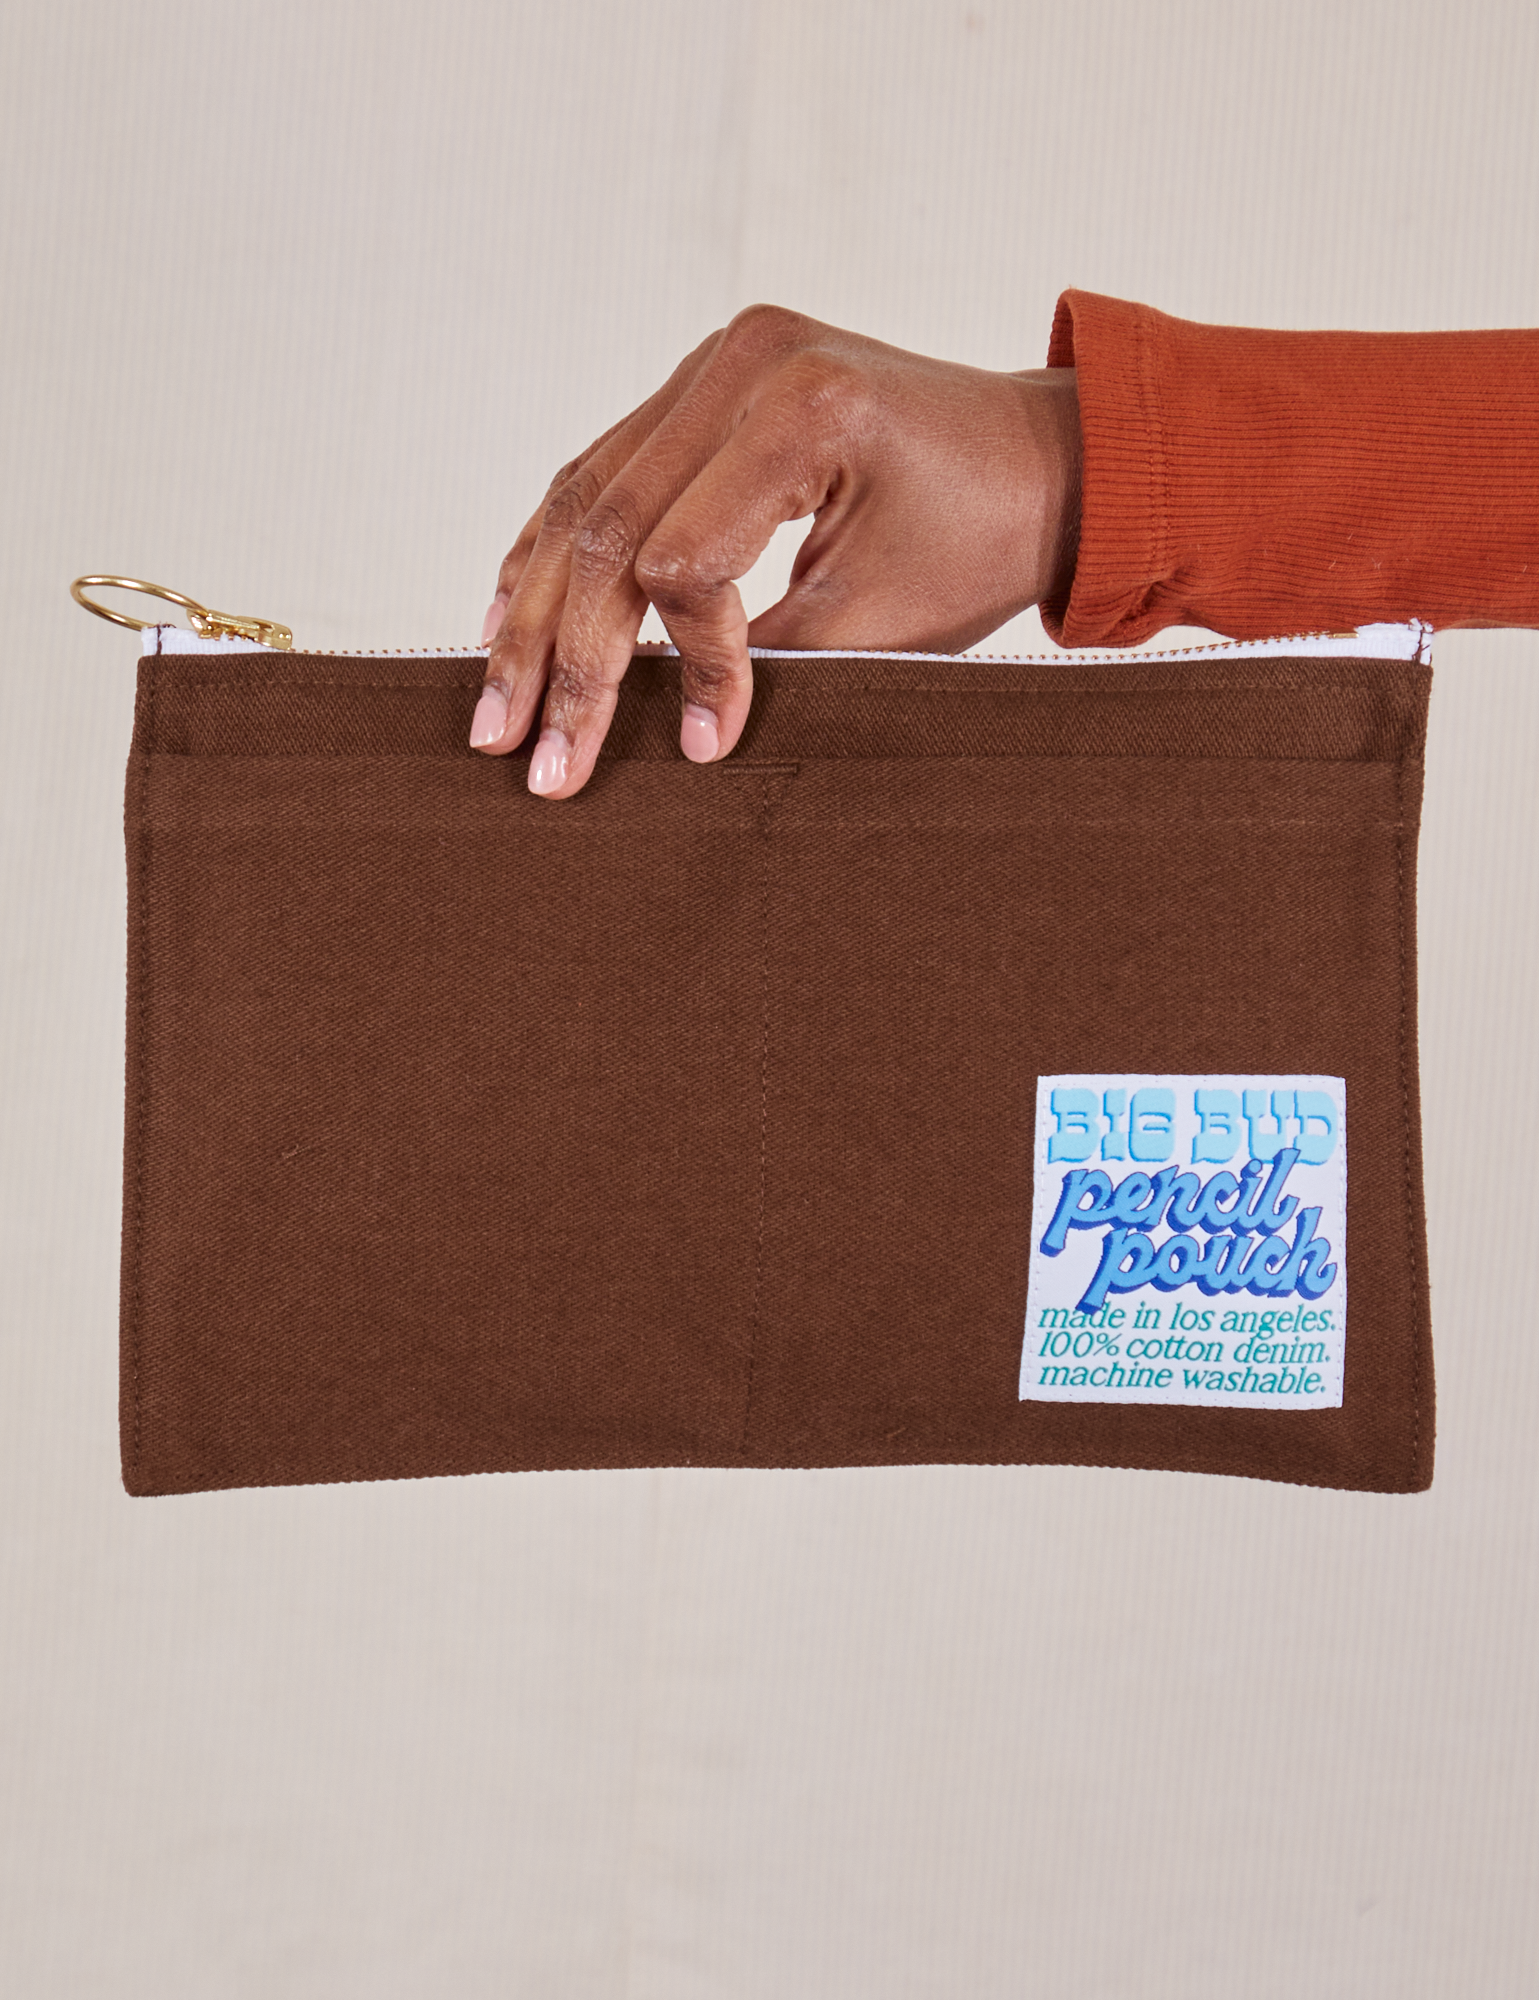 Pencil Pouch in Fudgesicle Brown held by model